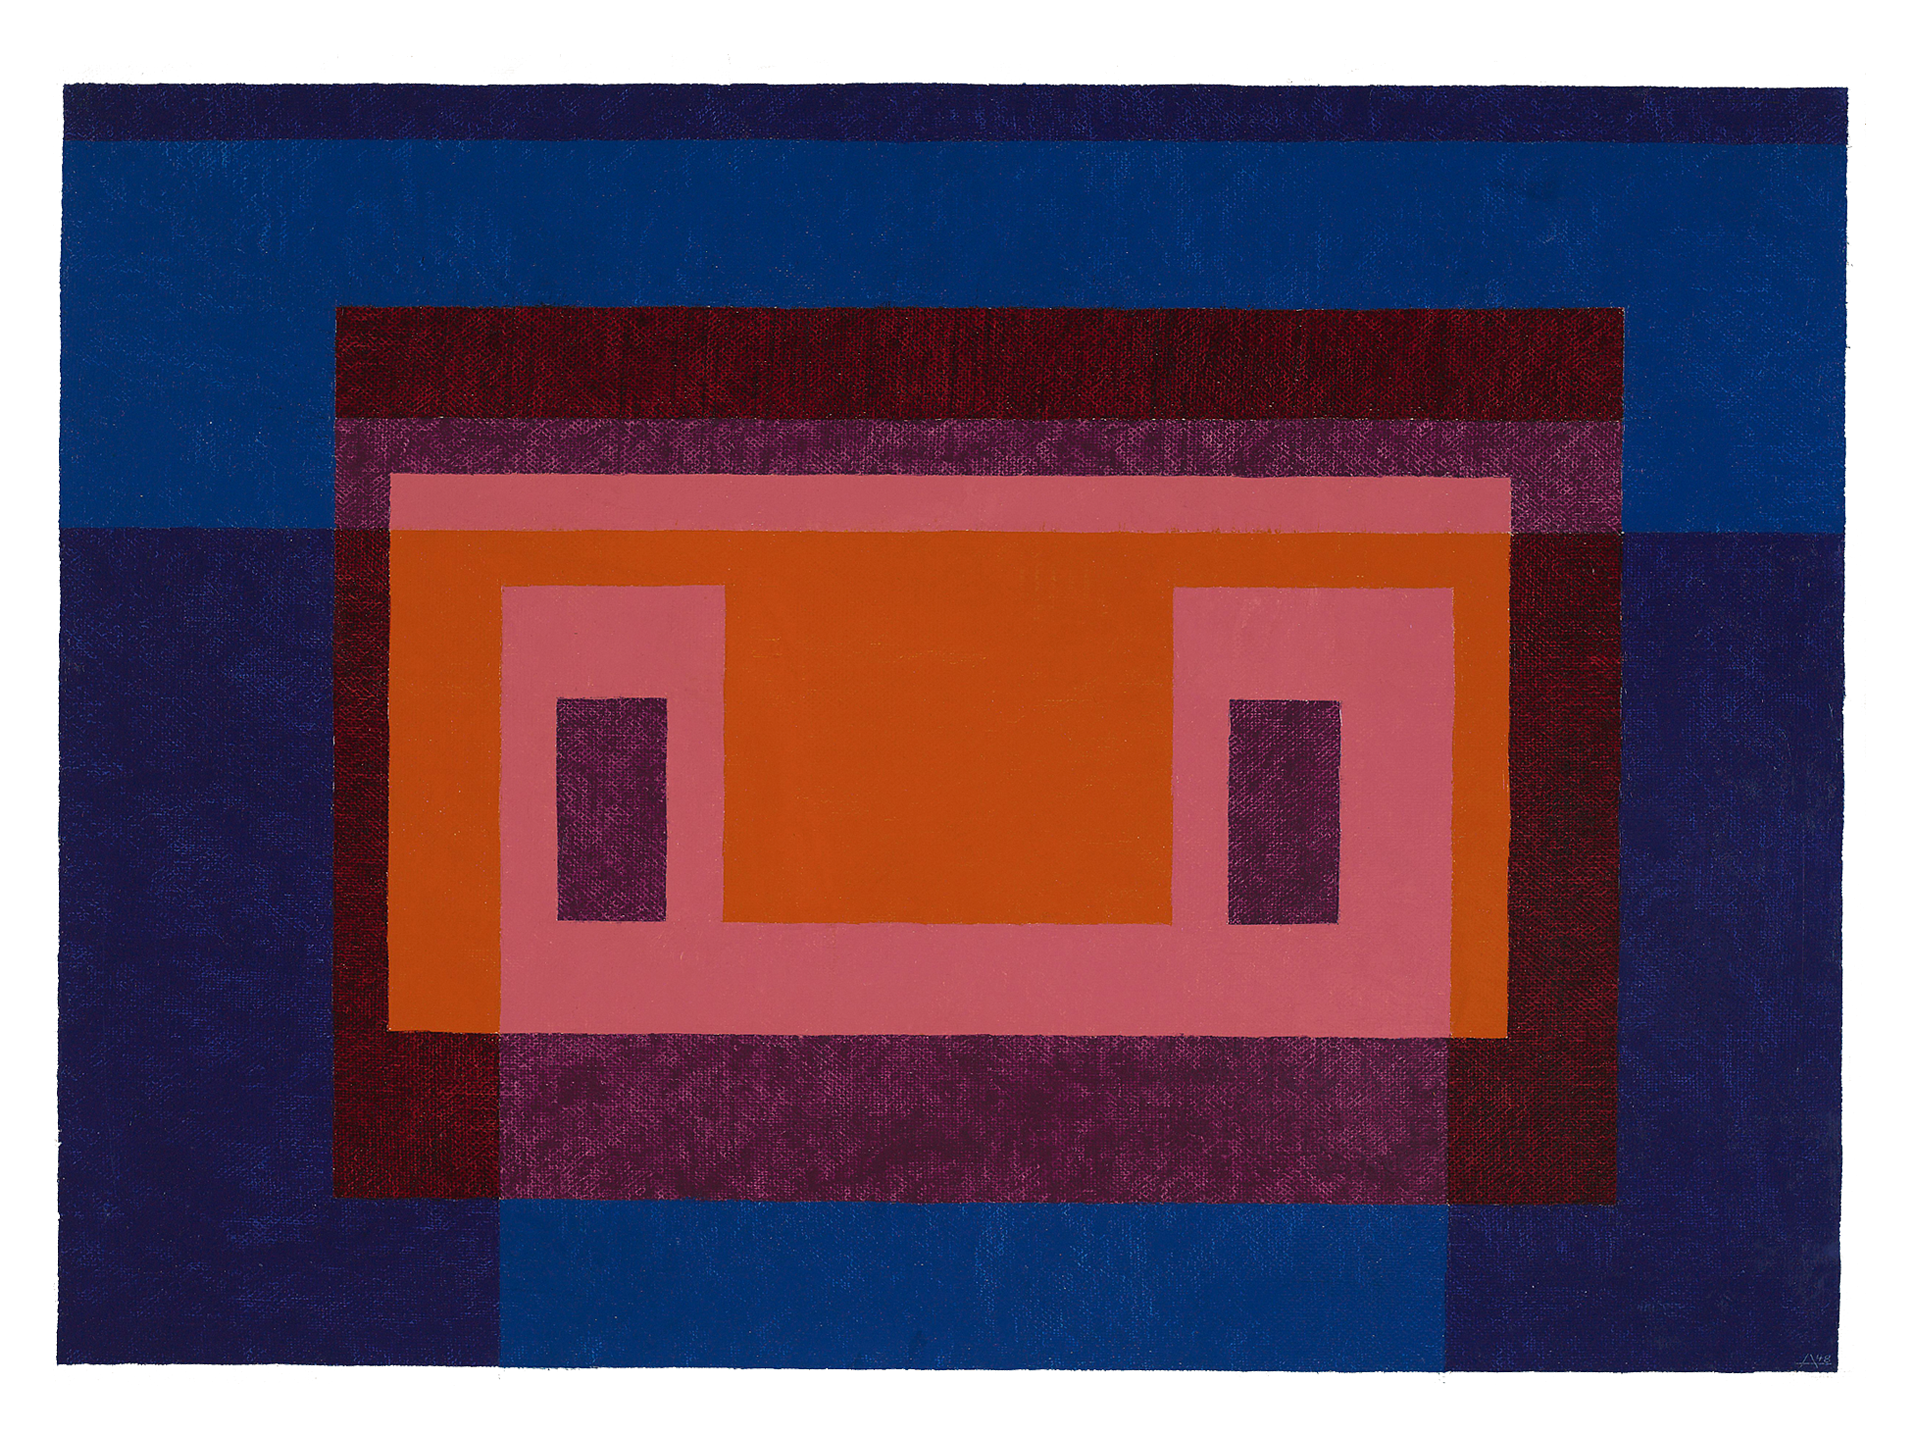 A painting by Josef Albers titled Variant / Adobe: 4 Central Warm Colors Surrounded by 2 Blues, dated 1948.